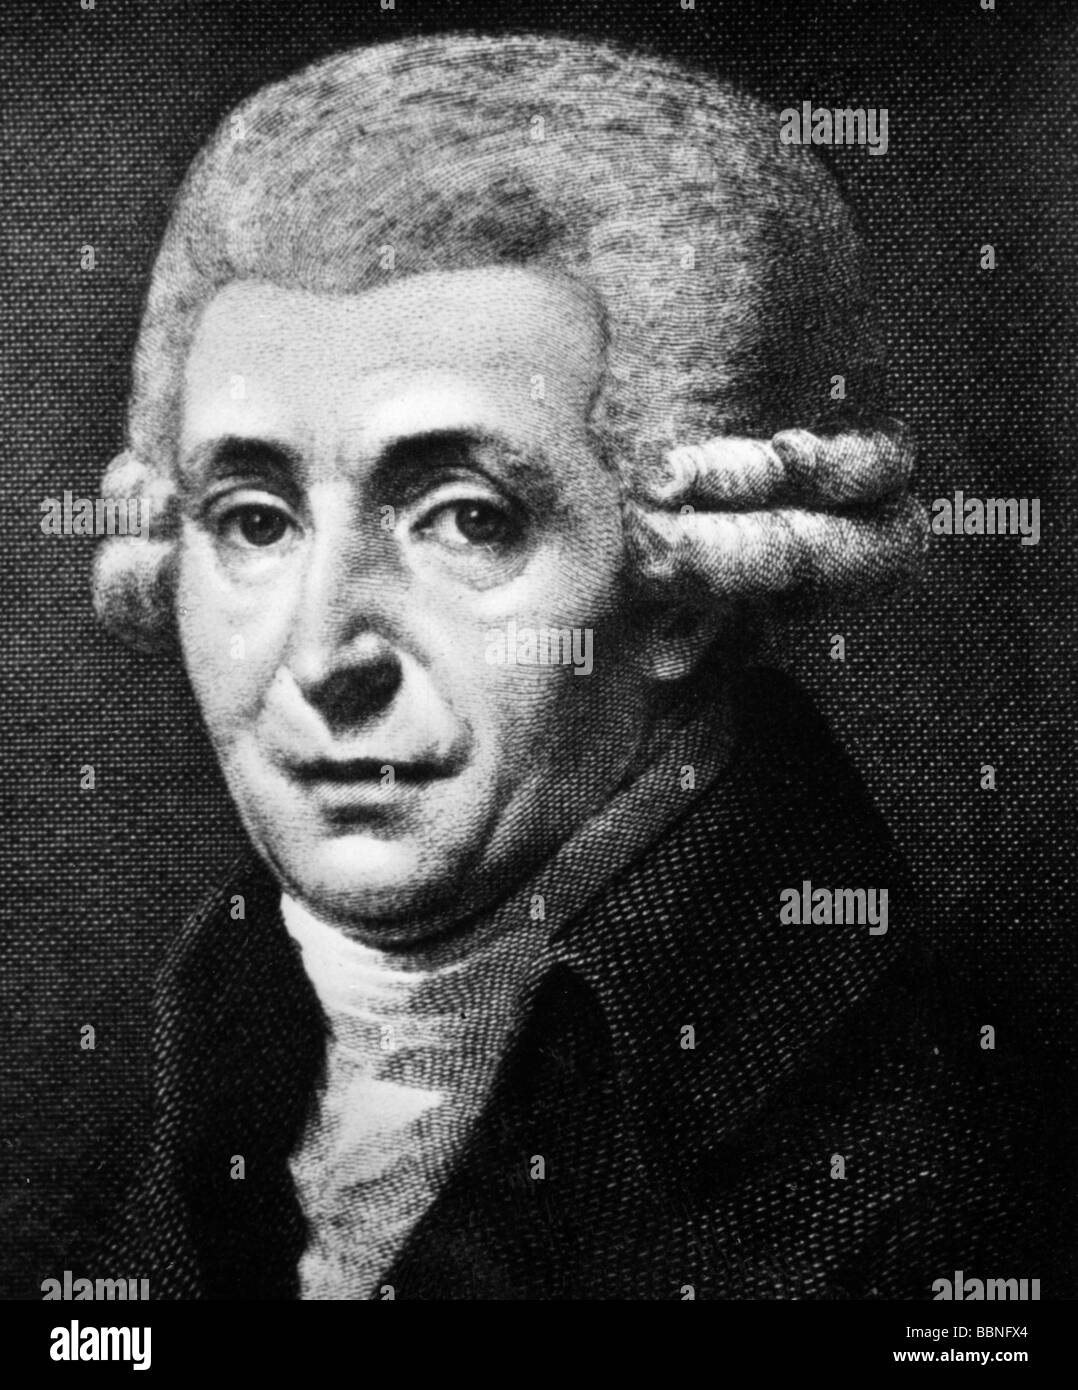 Haydn, Joseph, 31.3.1732 - 31.5.1809, Austrian composer, portrait, copper engraving, 18th century, Artist's Copyright has not to be cleared Stock Photo